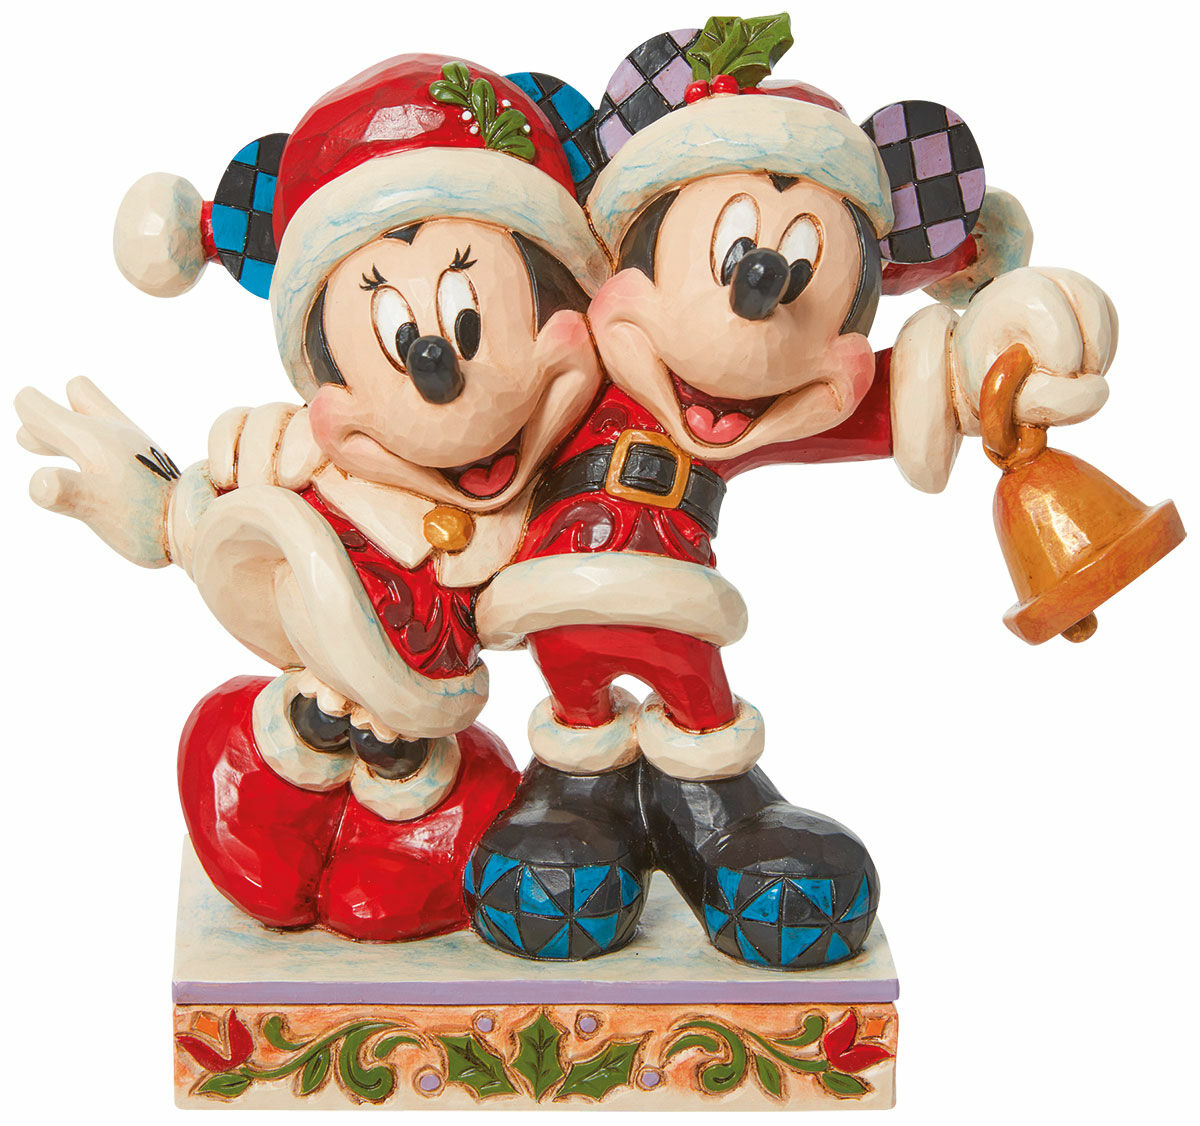 Sculpture "Minnie and Mickey with Bells", cast by Jim Shore